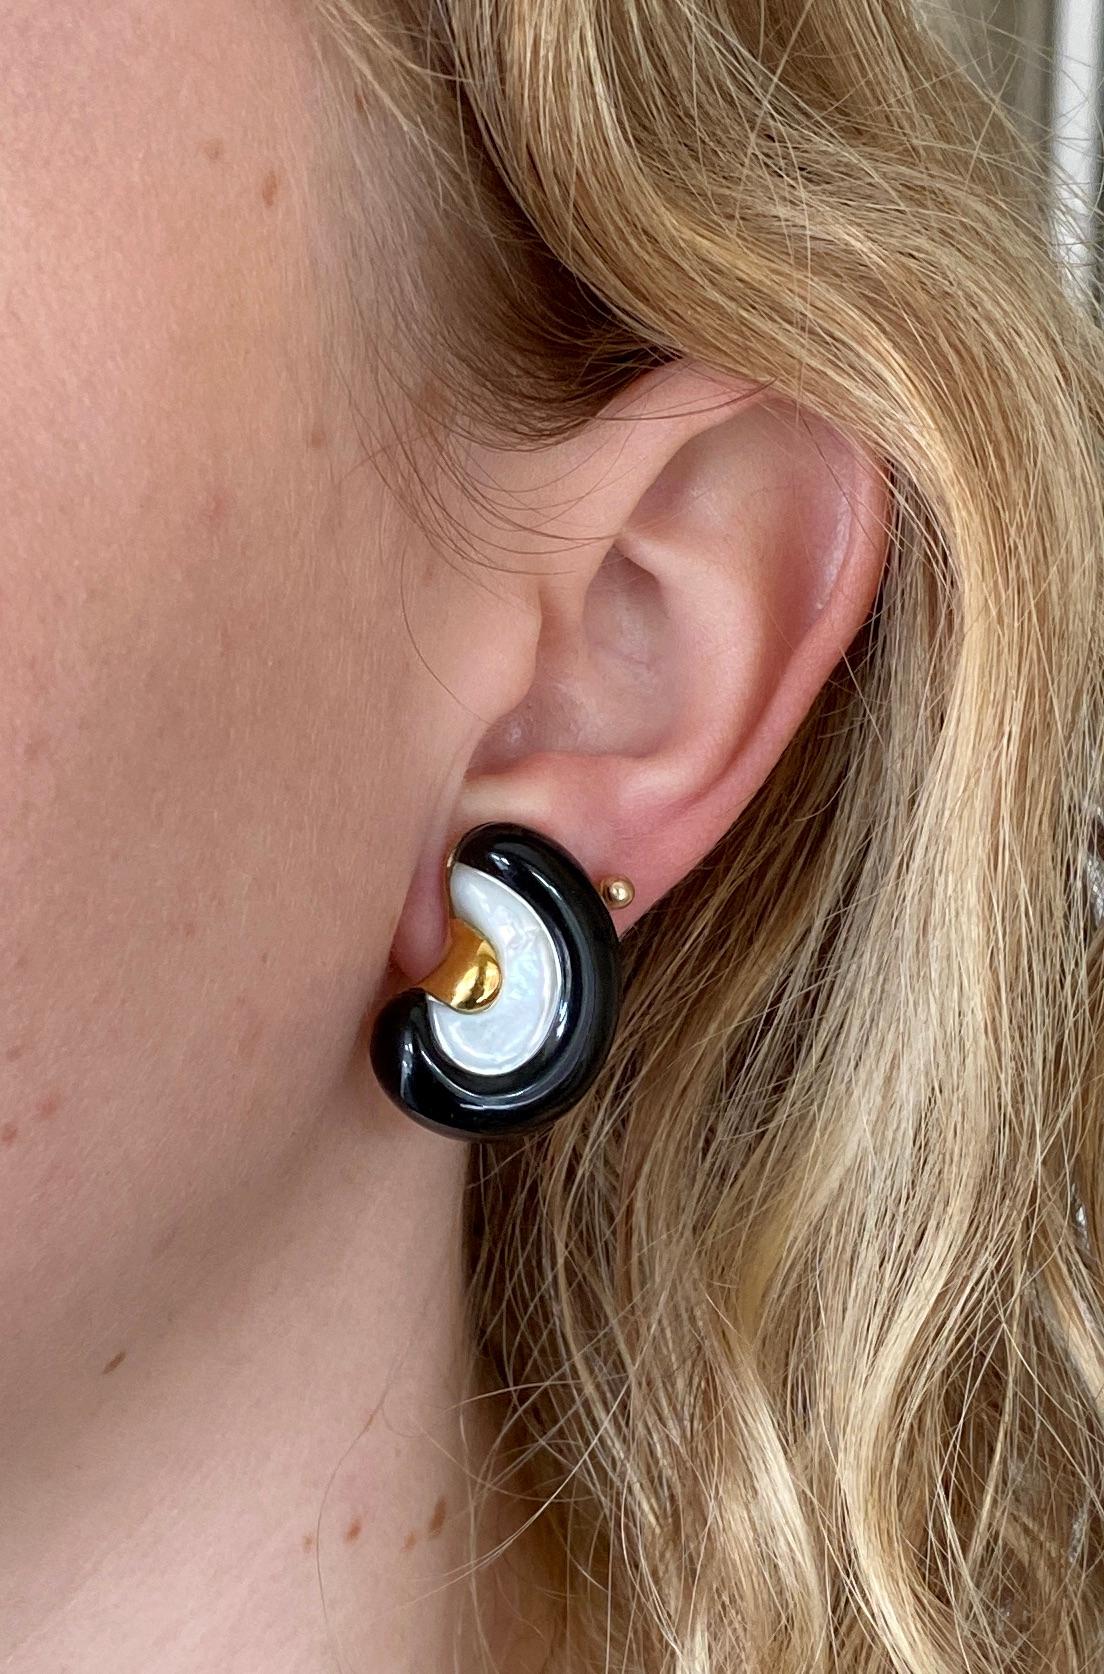 A pair of classic black, white and gold earrings.

The omega-backed earrings feature carved black onyx and white mother-of-pearl set in 14K yellow gold. 

They measure just over an inch (26.3mm) high and together weigh 16 1/2 grams. Each earring is